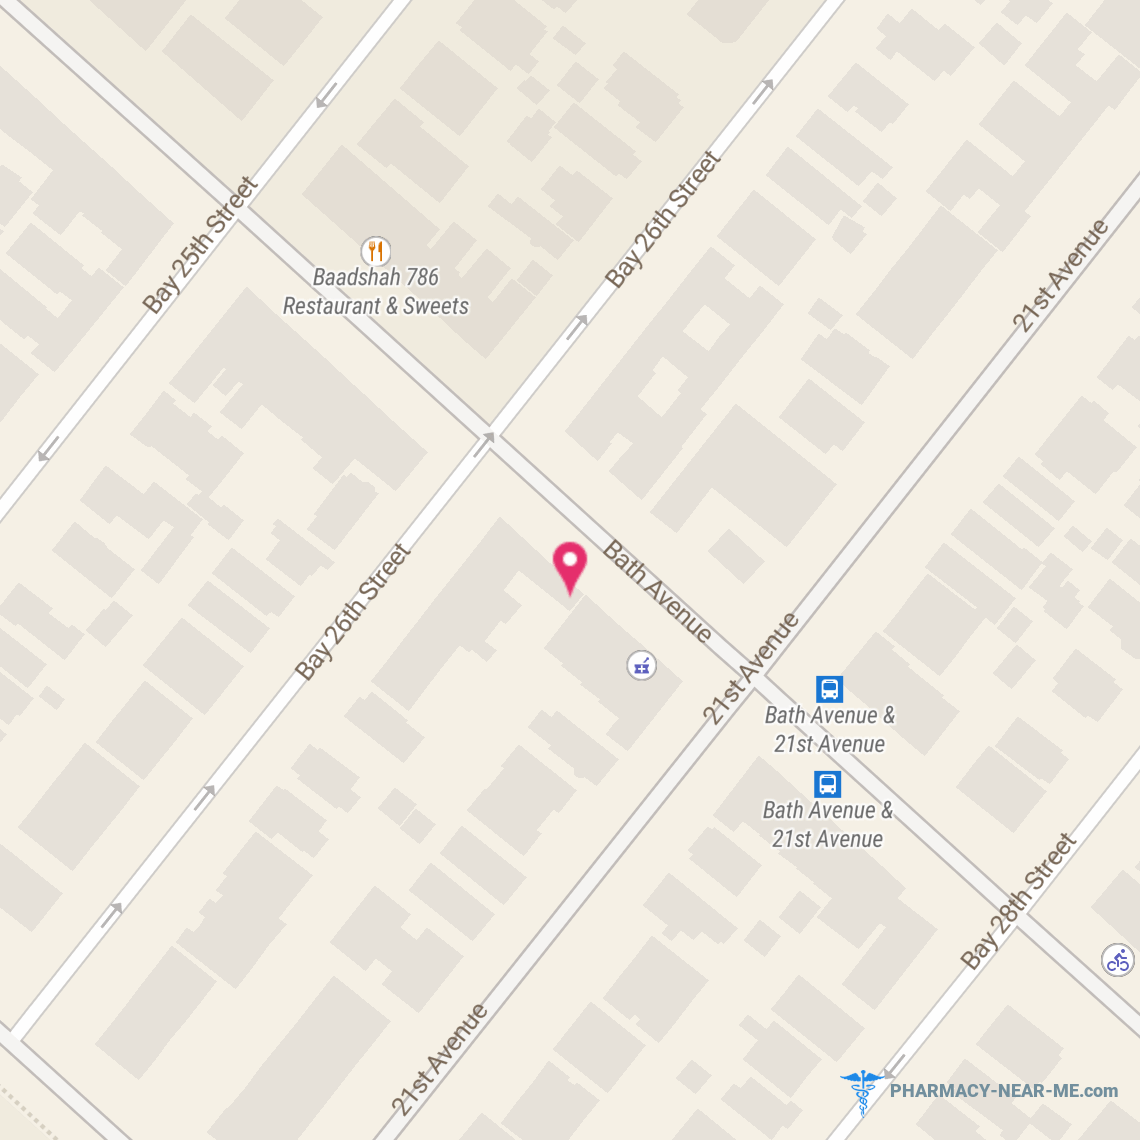 PARAS DRUGS - Pharmacy Hours, Phone, Reviews & Information: 2070 Bath Avenue, Brooklyn, New York 11214, United States